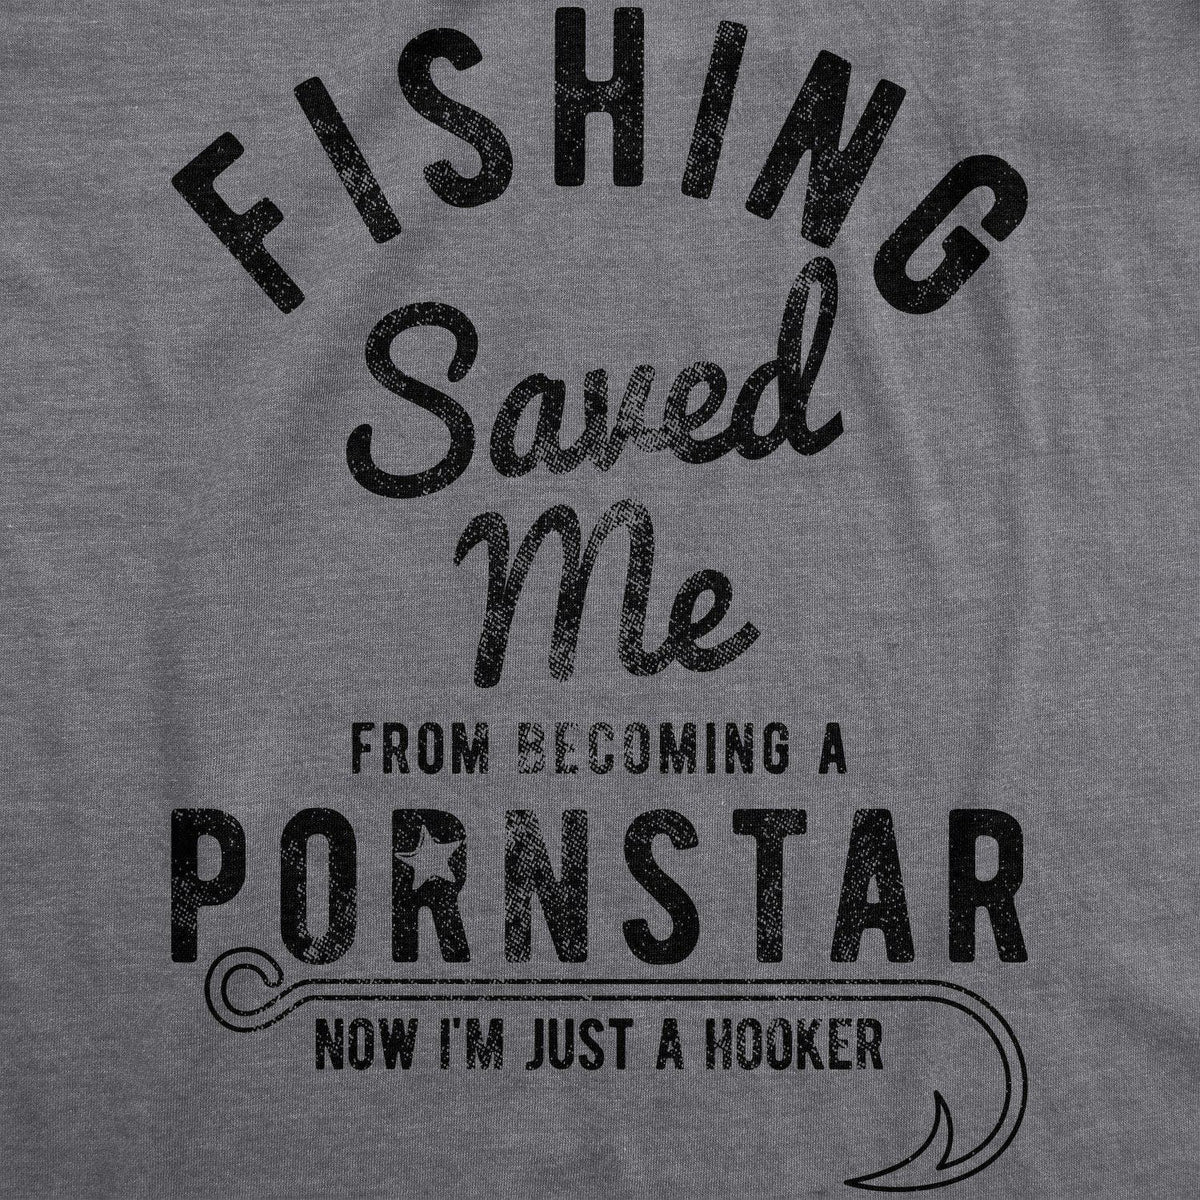 Fishing Saved Me From Becoming A Pornstar Women&#39;s Tshirt  -  Crazy Dog T-Shirts